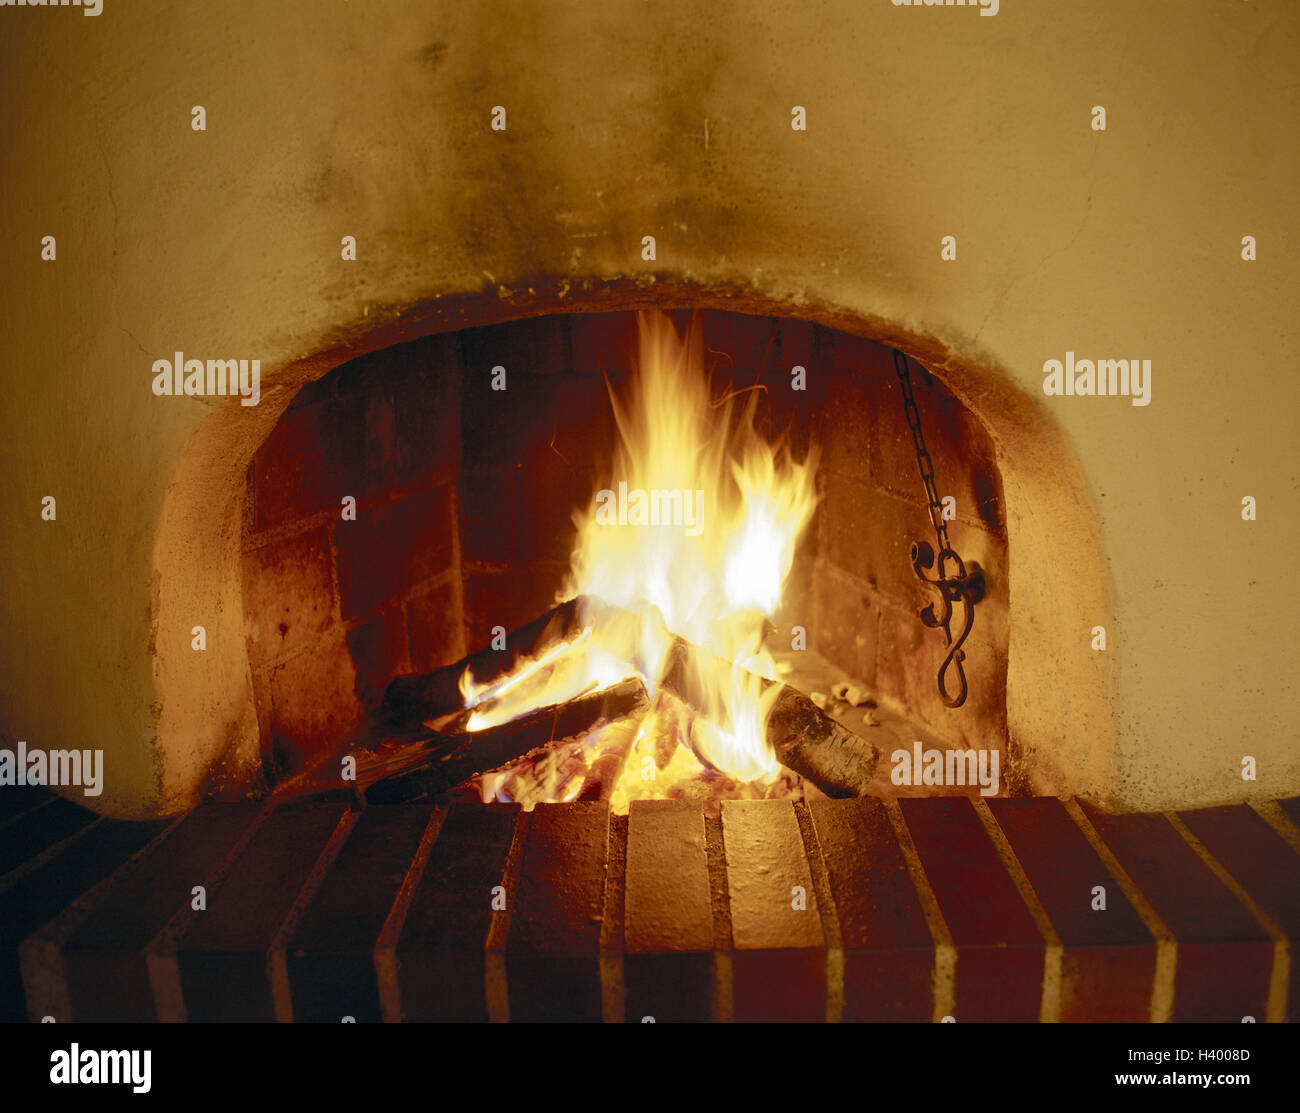 Open fire, open chimney, sitting room chimney, defended in numbers, rustic, fire woodwork, woodwork, Wooden logs, lighted, fire, flames, burn, put the heating on, heat, cosiness, heat, romanticism, material recording, Still life, inside Stock Photo